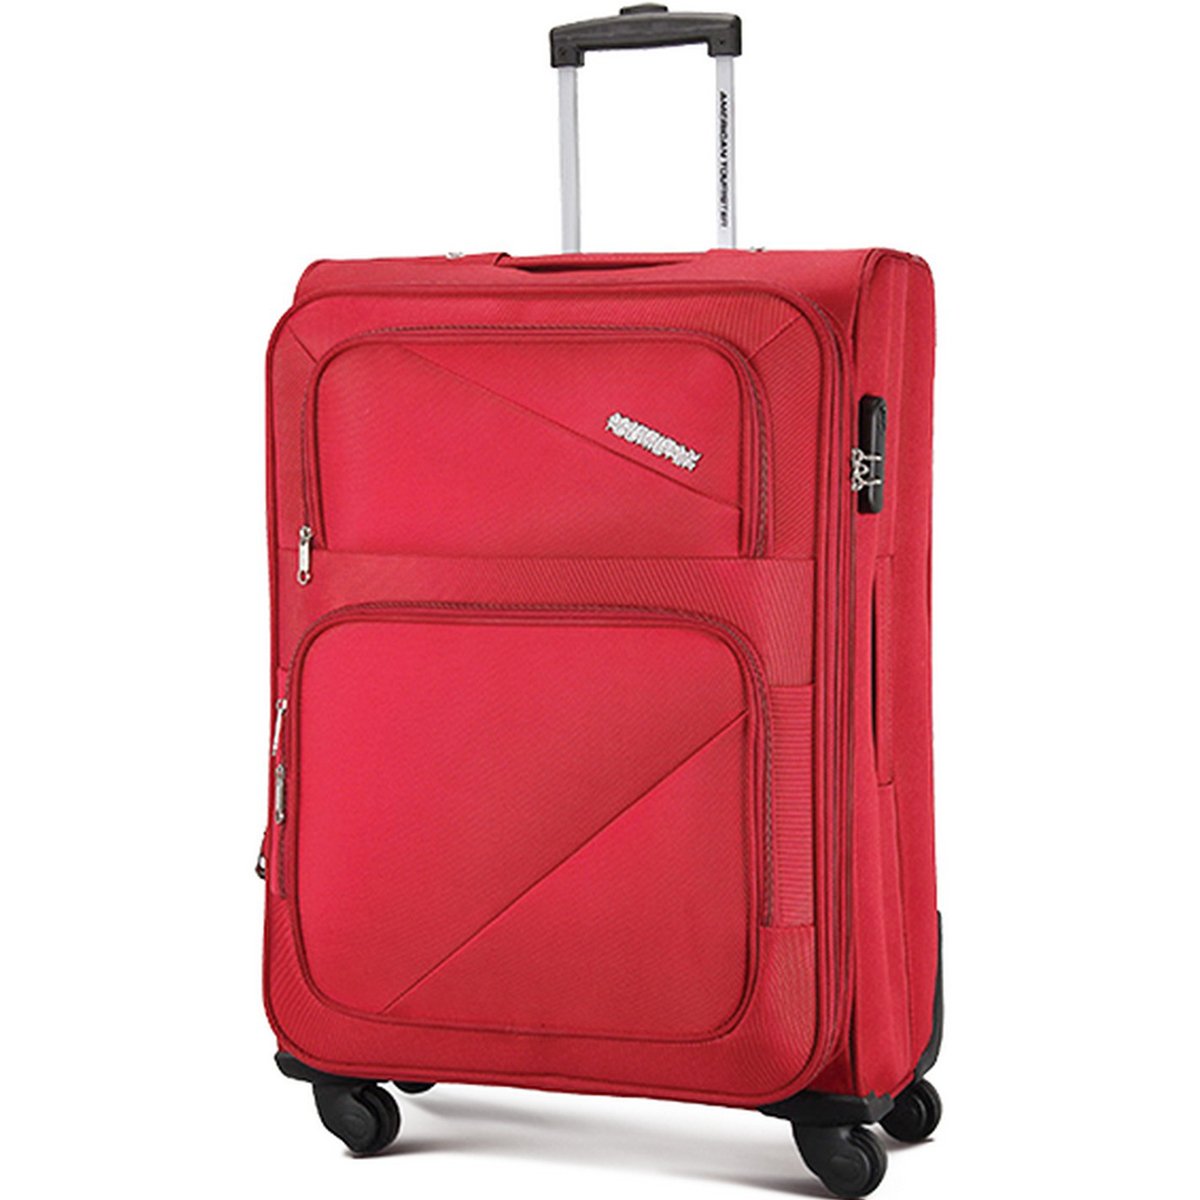 American Tourister Cocoa 4 Wheel Soft Trolley, 70 cm, Red